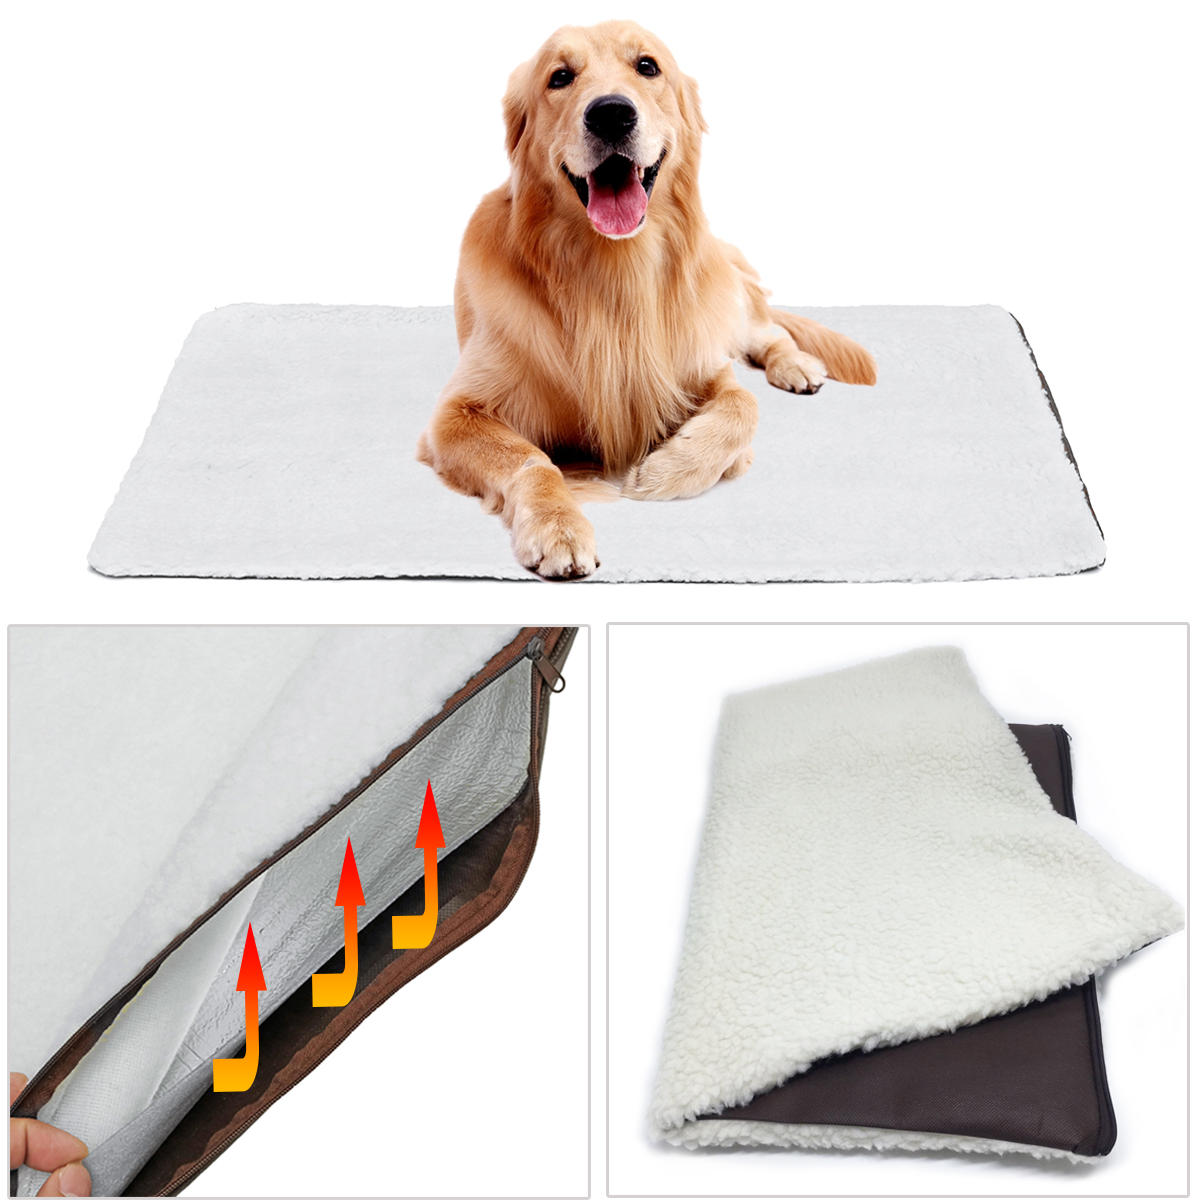 Large self heating dog bed fleece mat soft warm pet cat rug thermal washable pad Sale